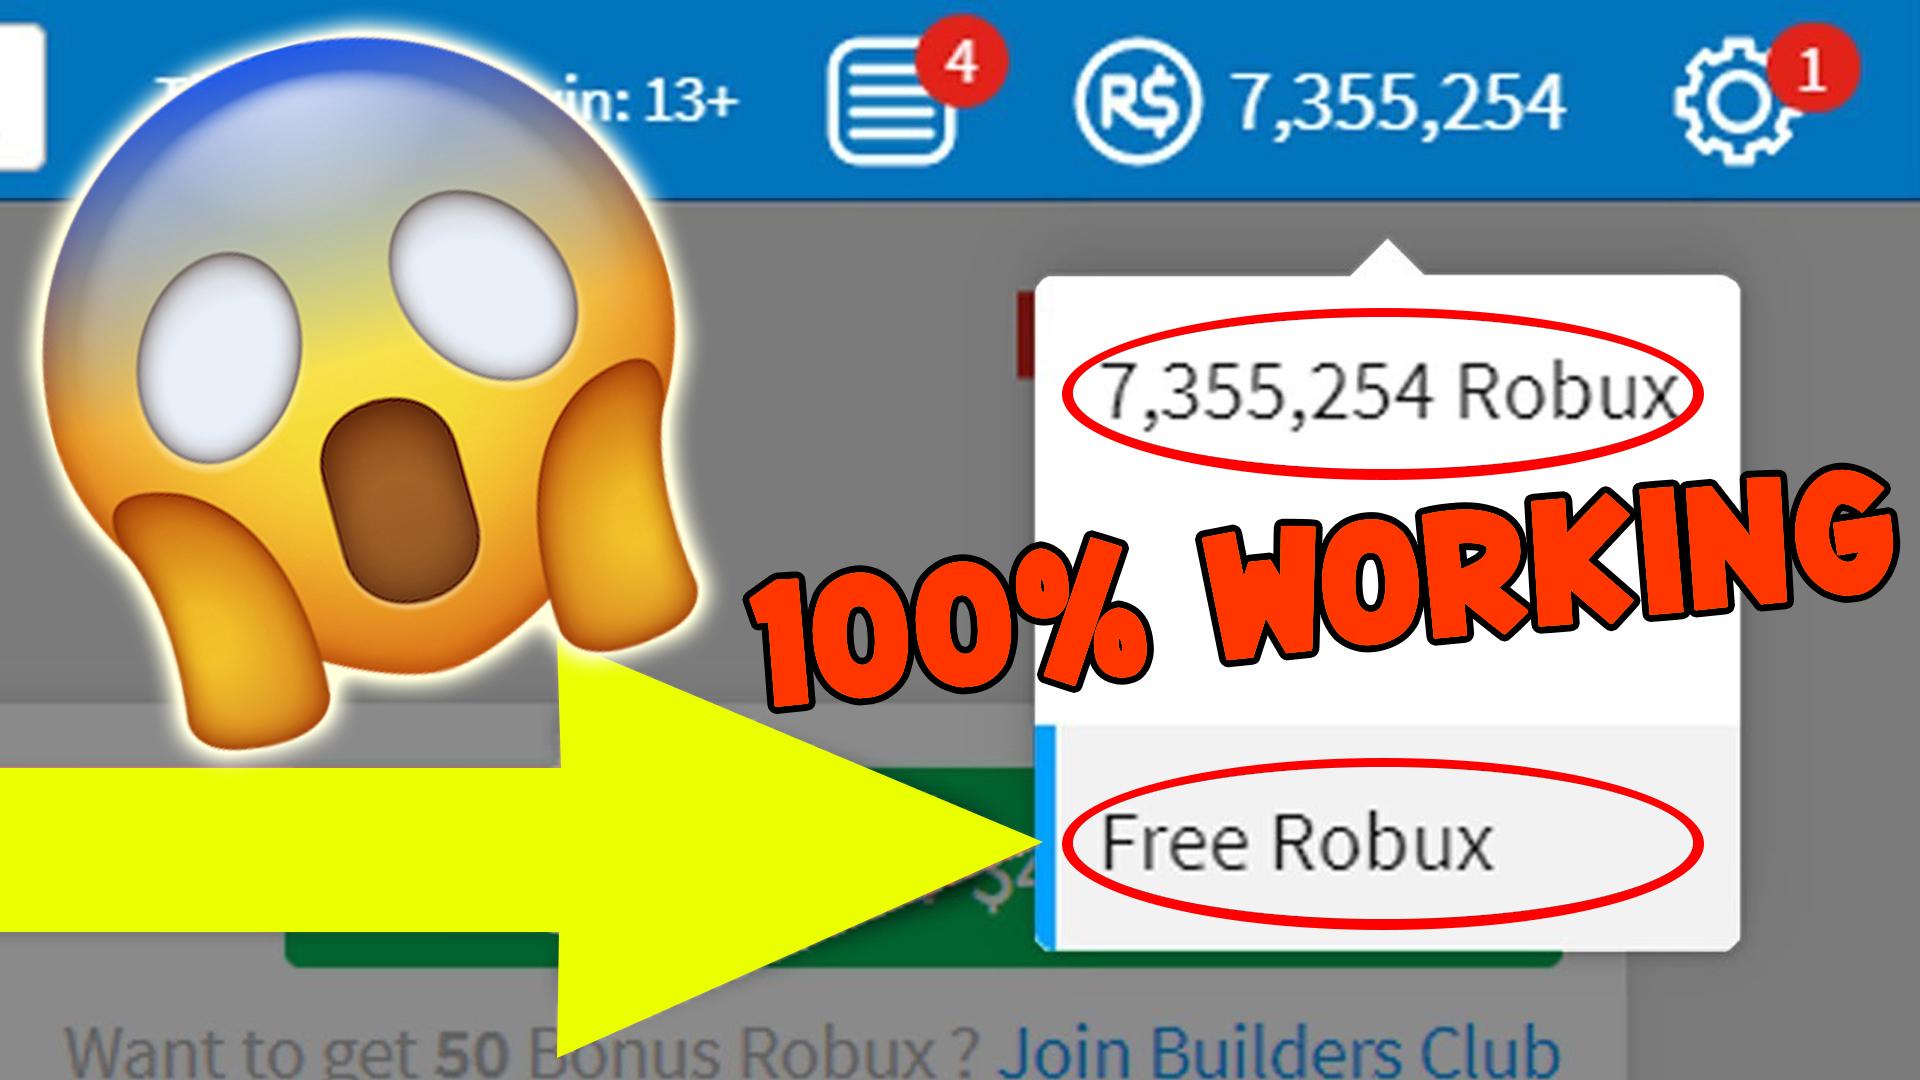 Download Robux Code APK v1.0 For Android